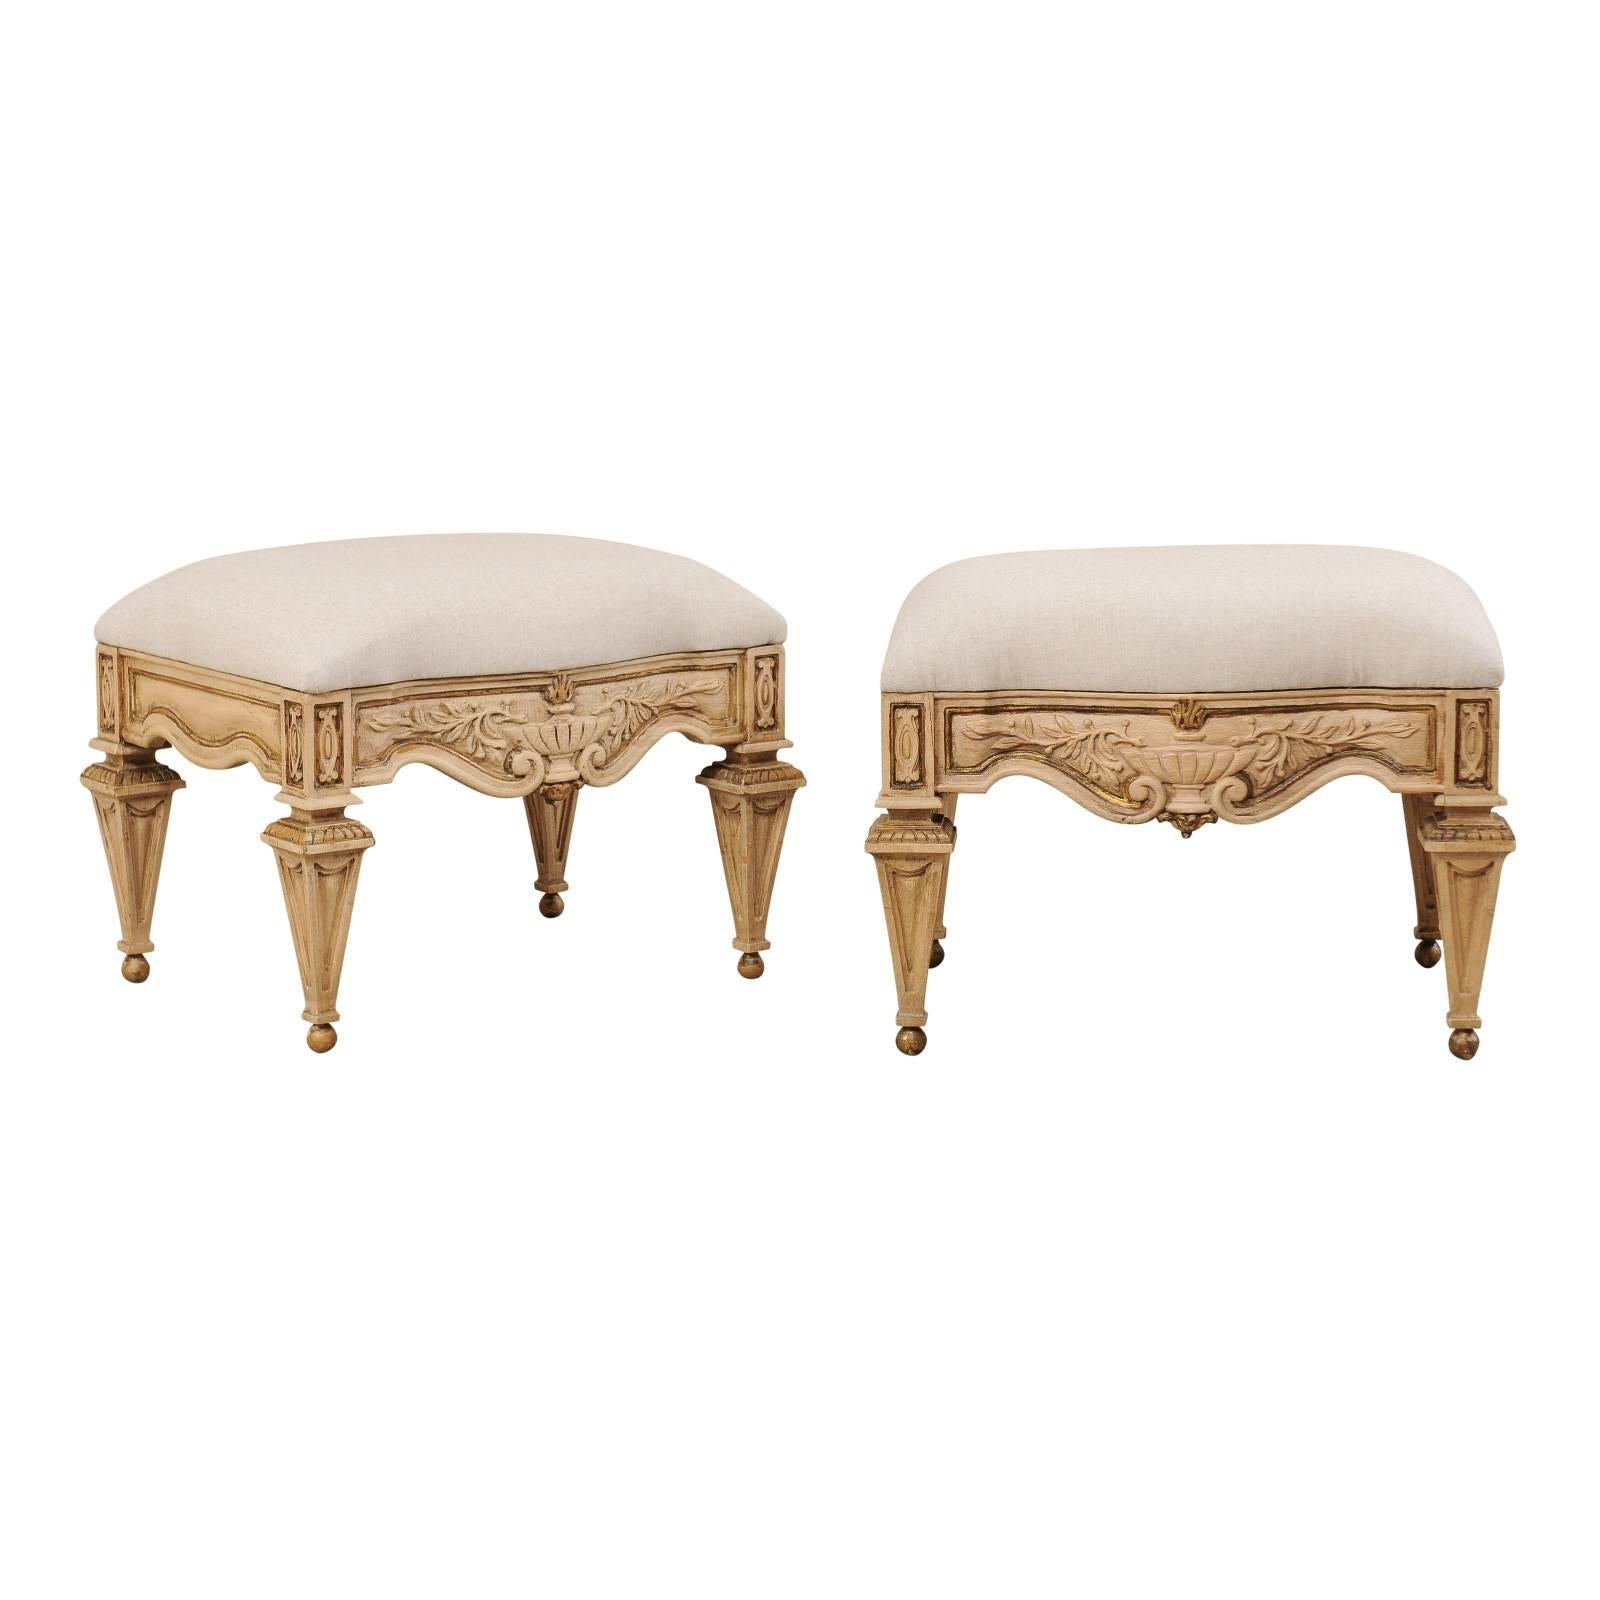 Pair of Italian Style Carved Ash Wood Upholstered Vintage Stools